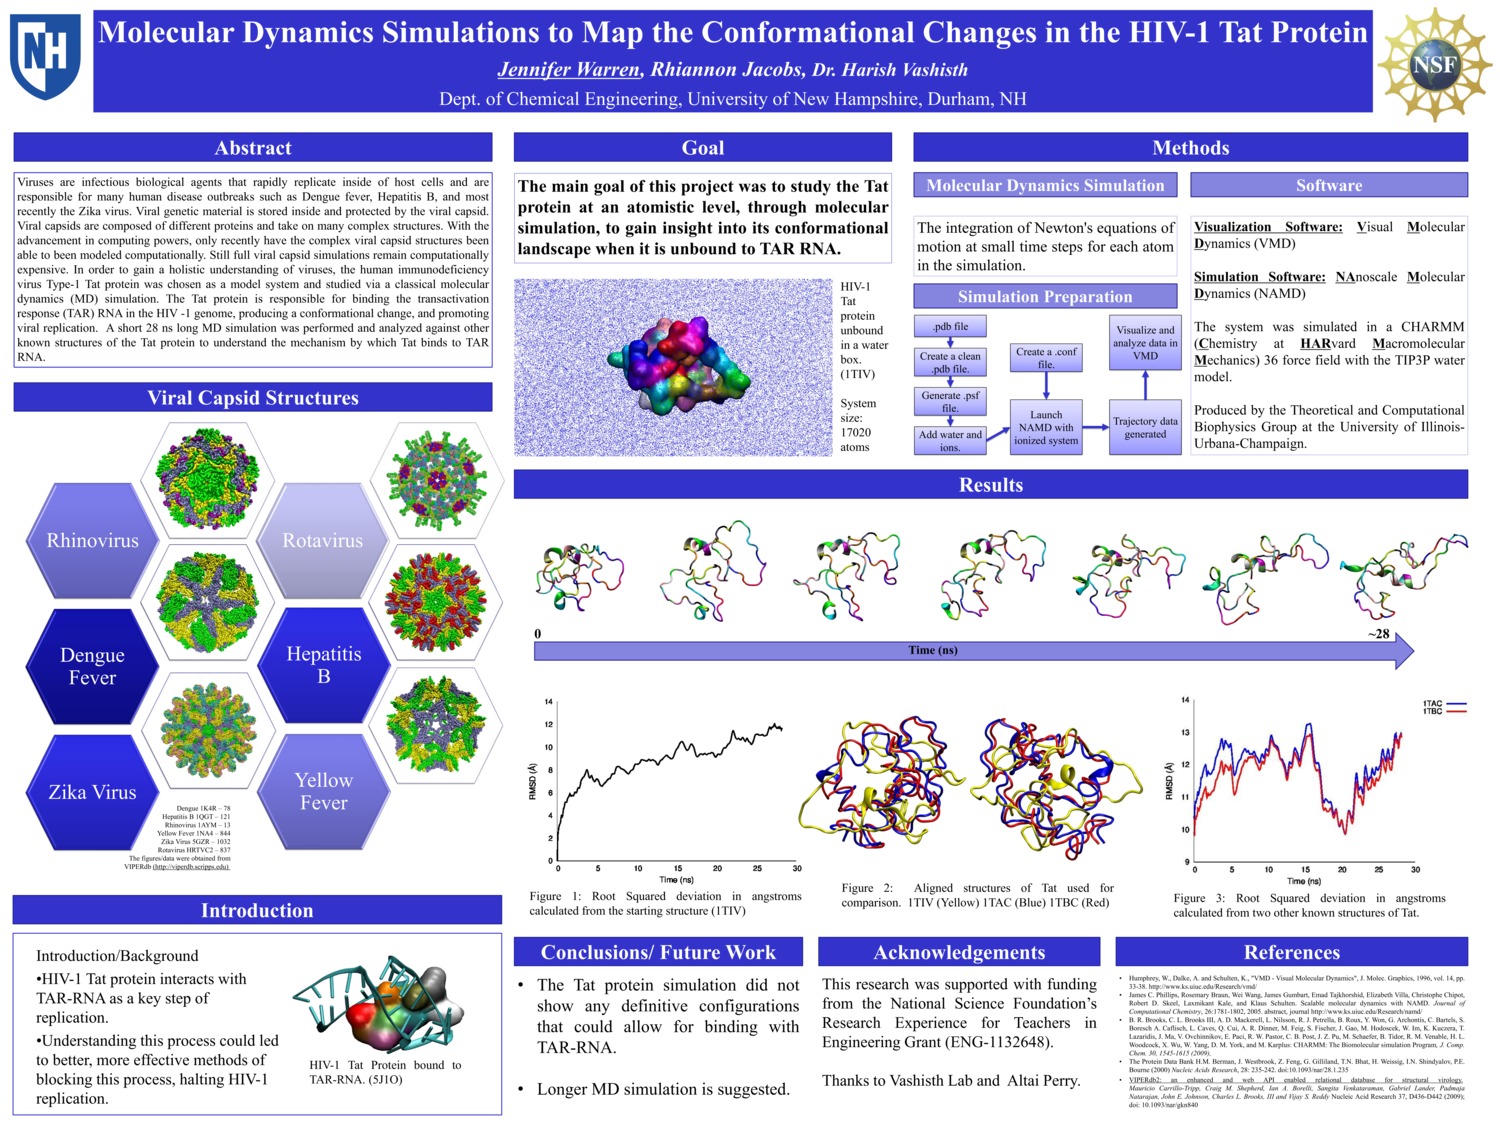 Molecular Dynamics Simulations To Map The Conformational Changes In The Hiv-1 Tat Protein by jlw1045